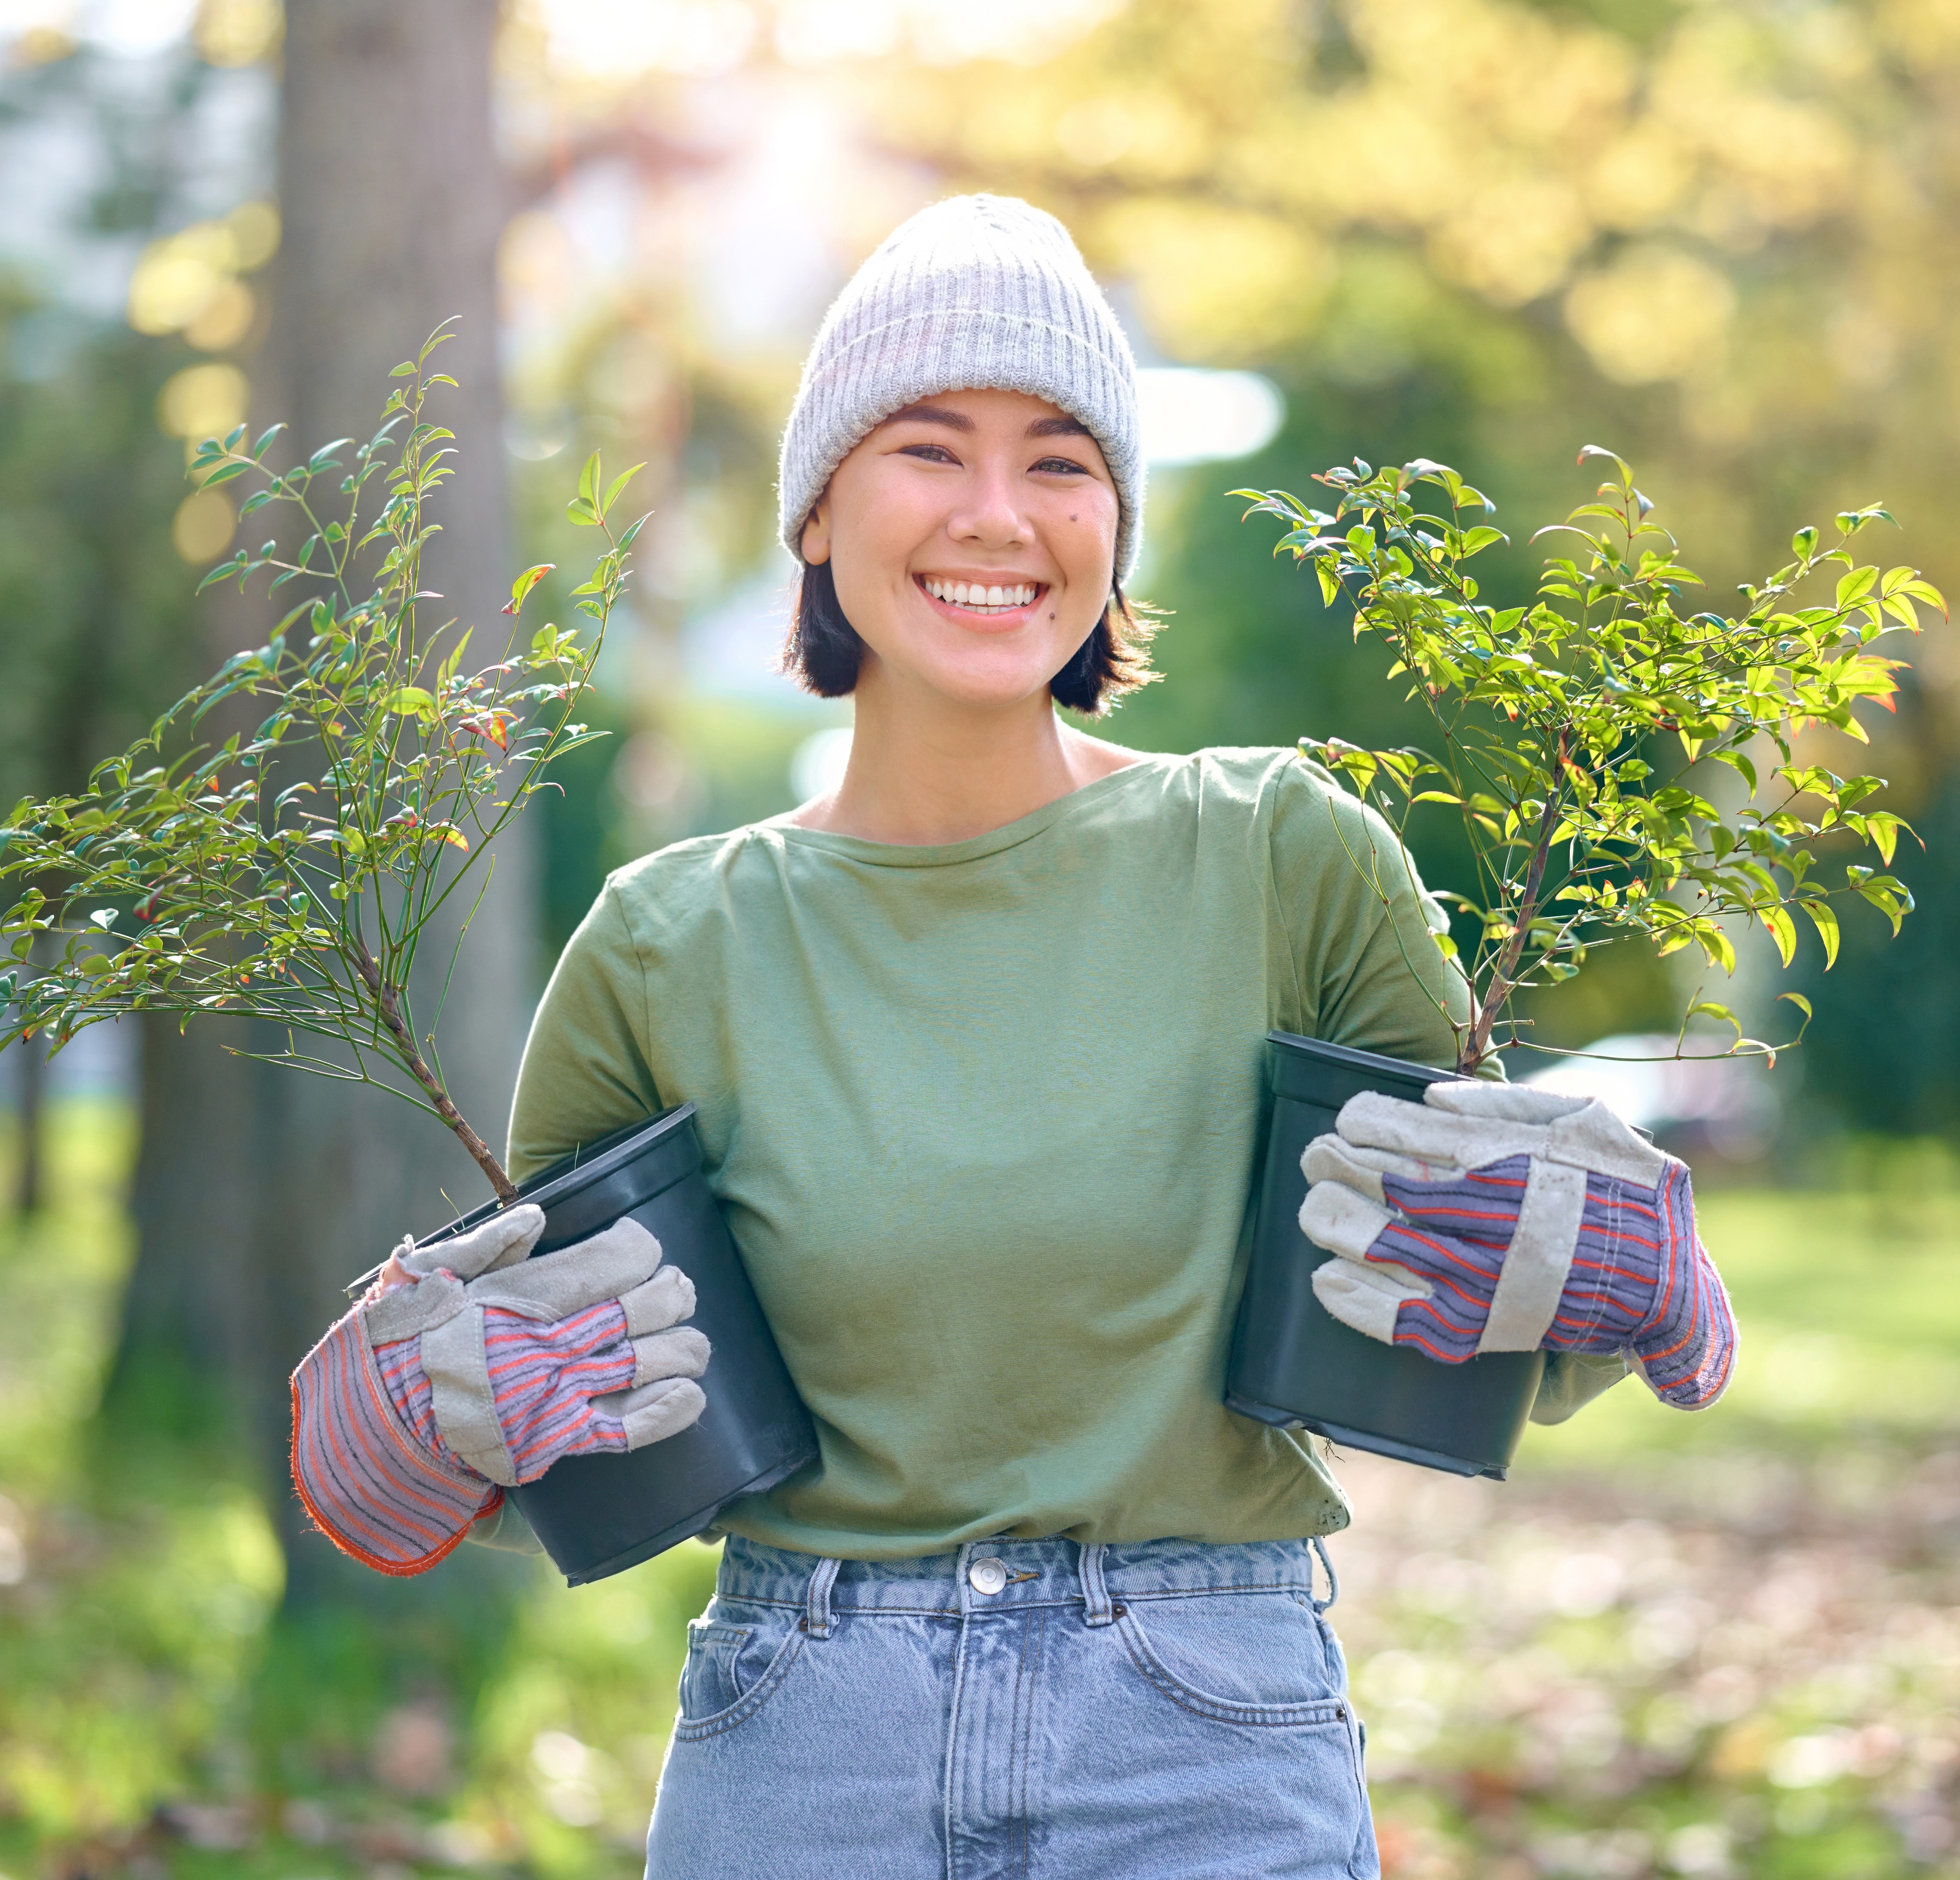 A woman smiling while holding two young trees